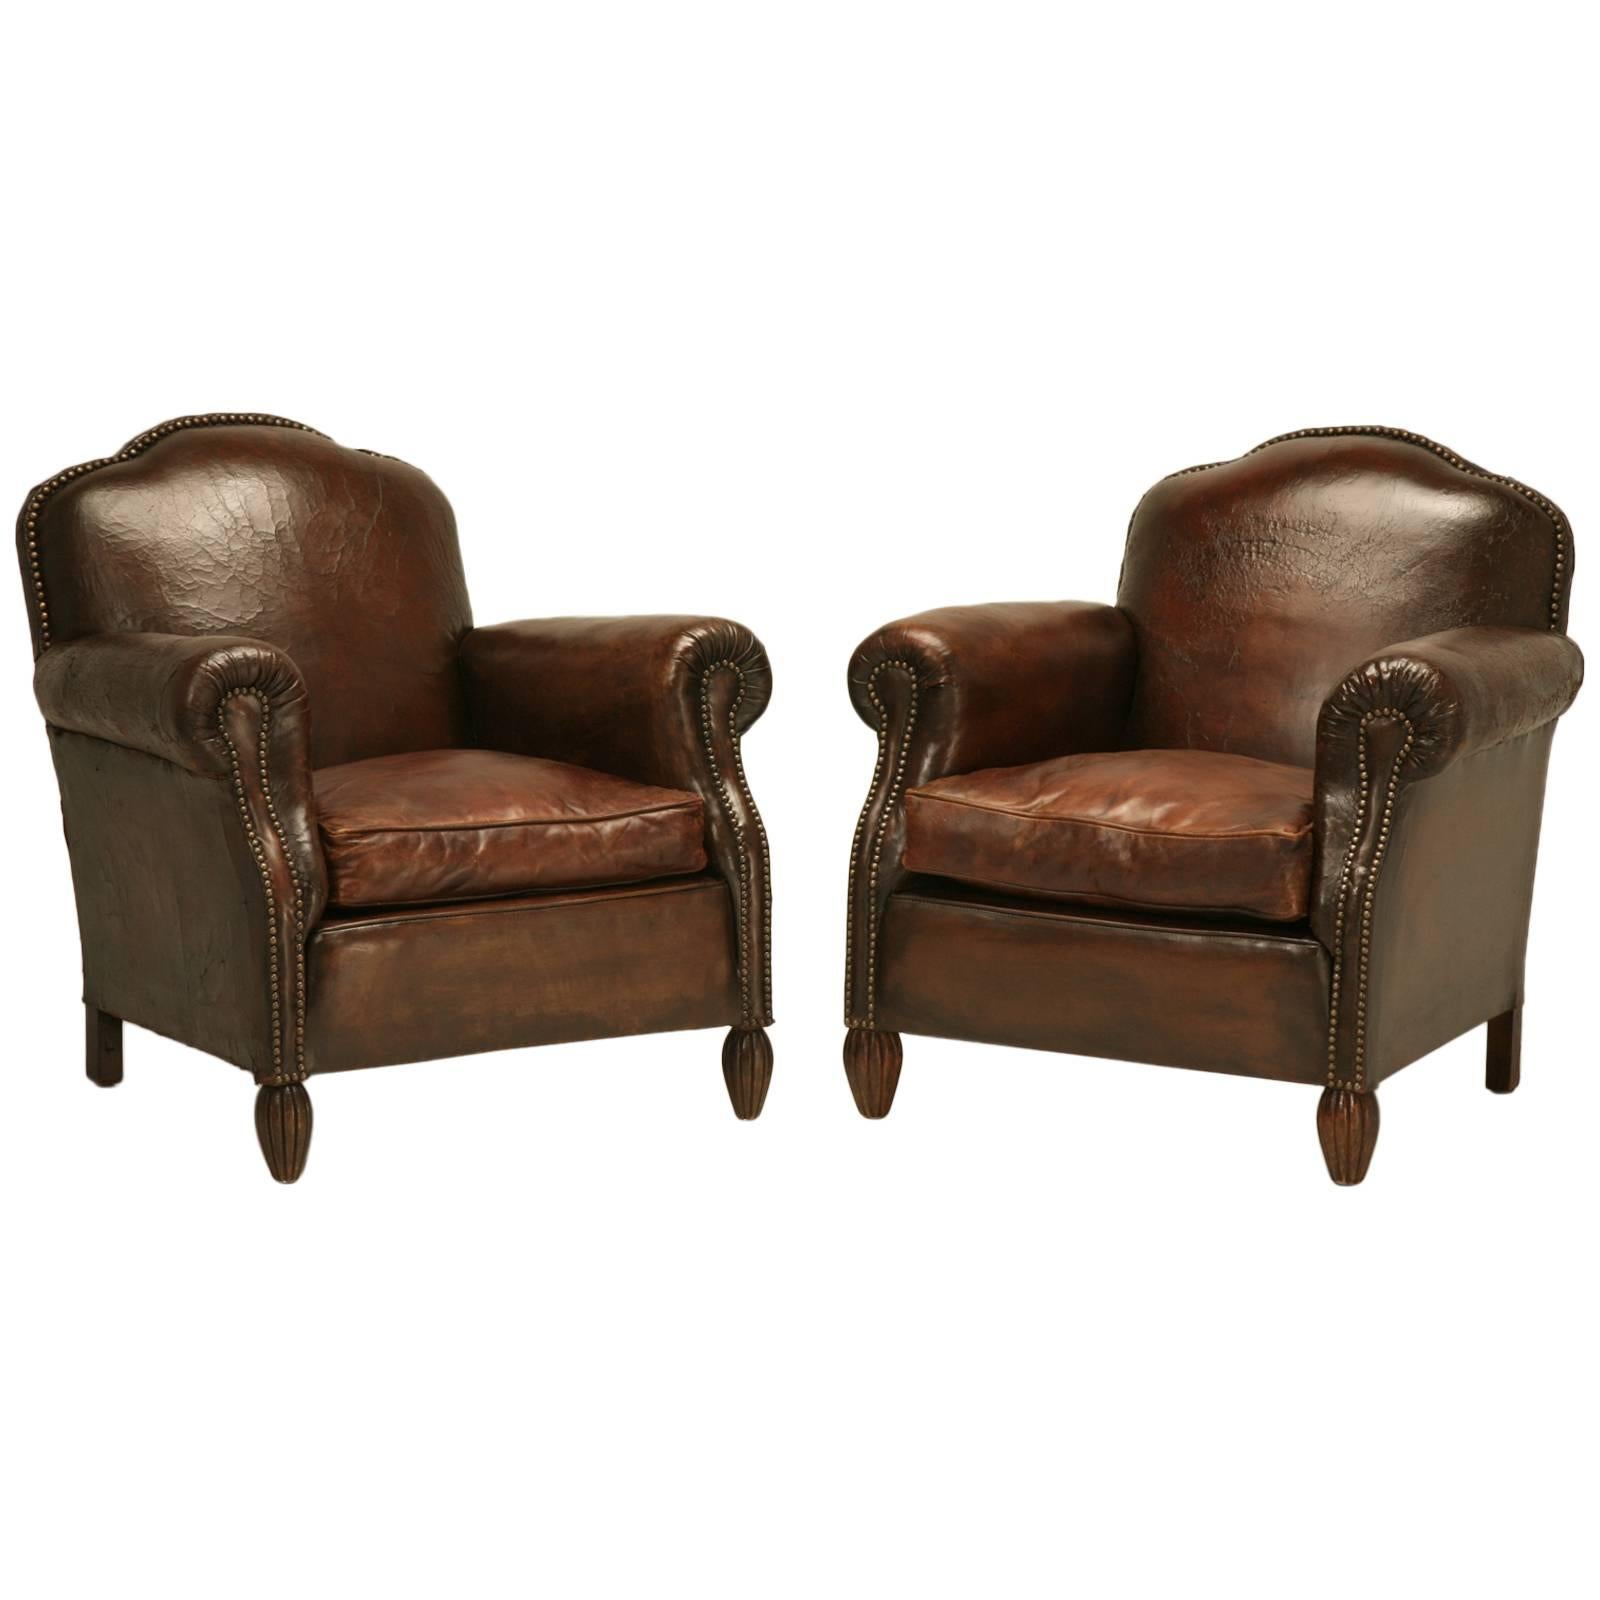 French Leather Club Chairs, circa 1930s